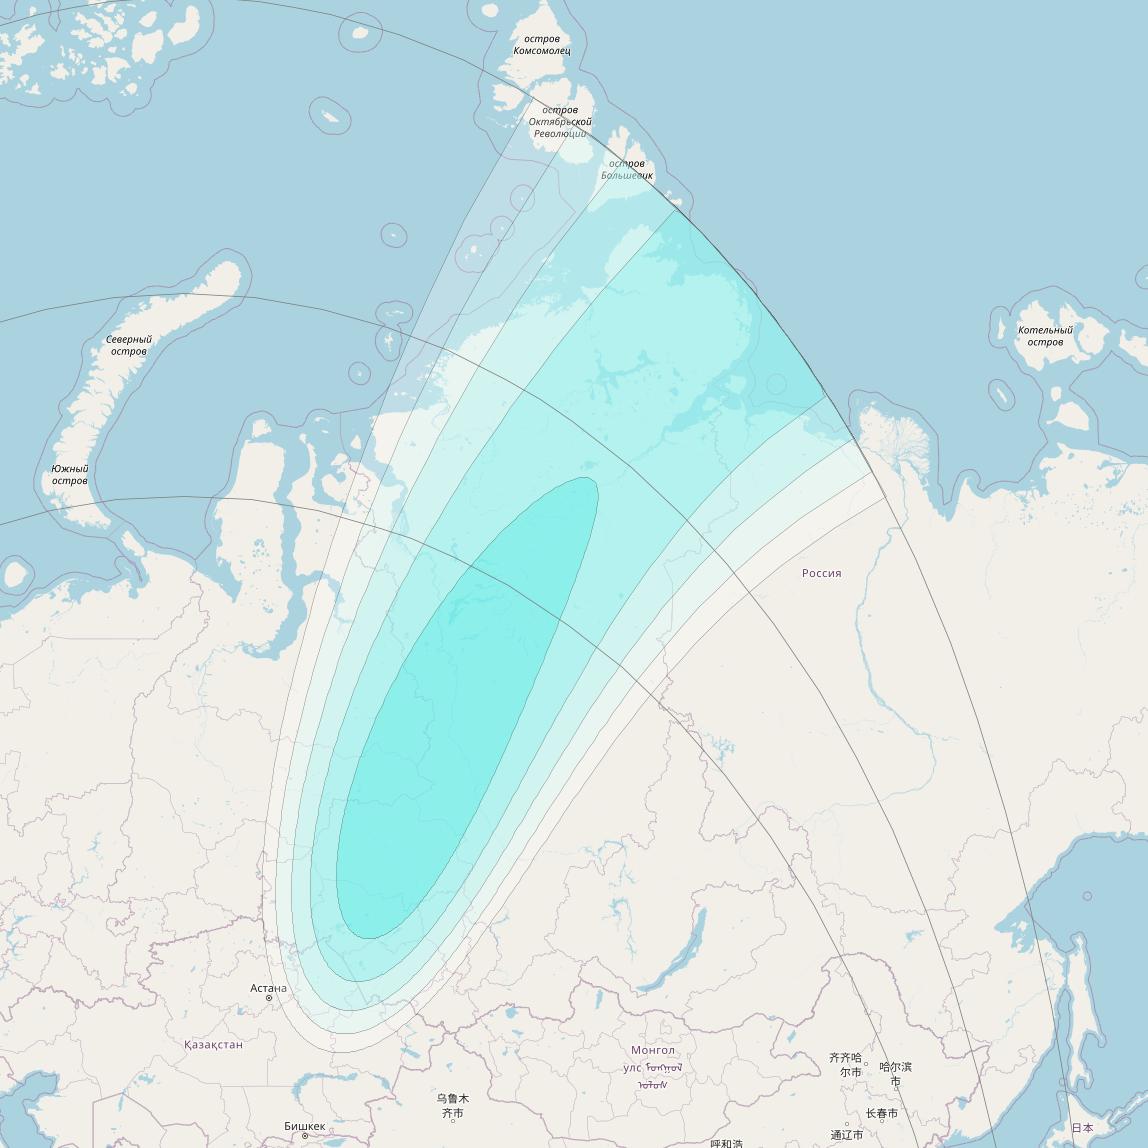 Inmarsat-4F2 at 64° E downlink L-band S125 User Spot beam coverage map